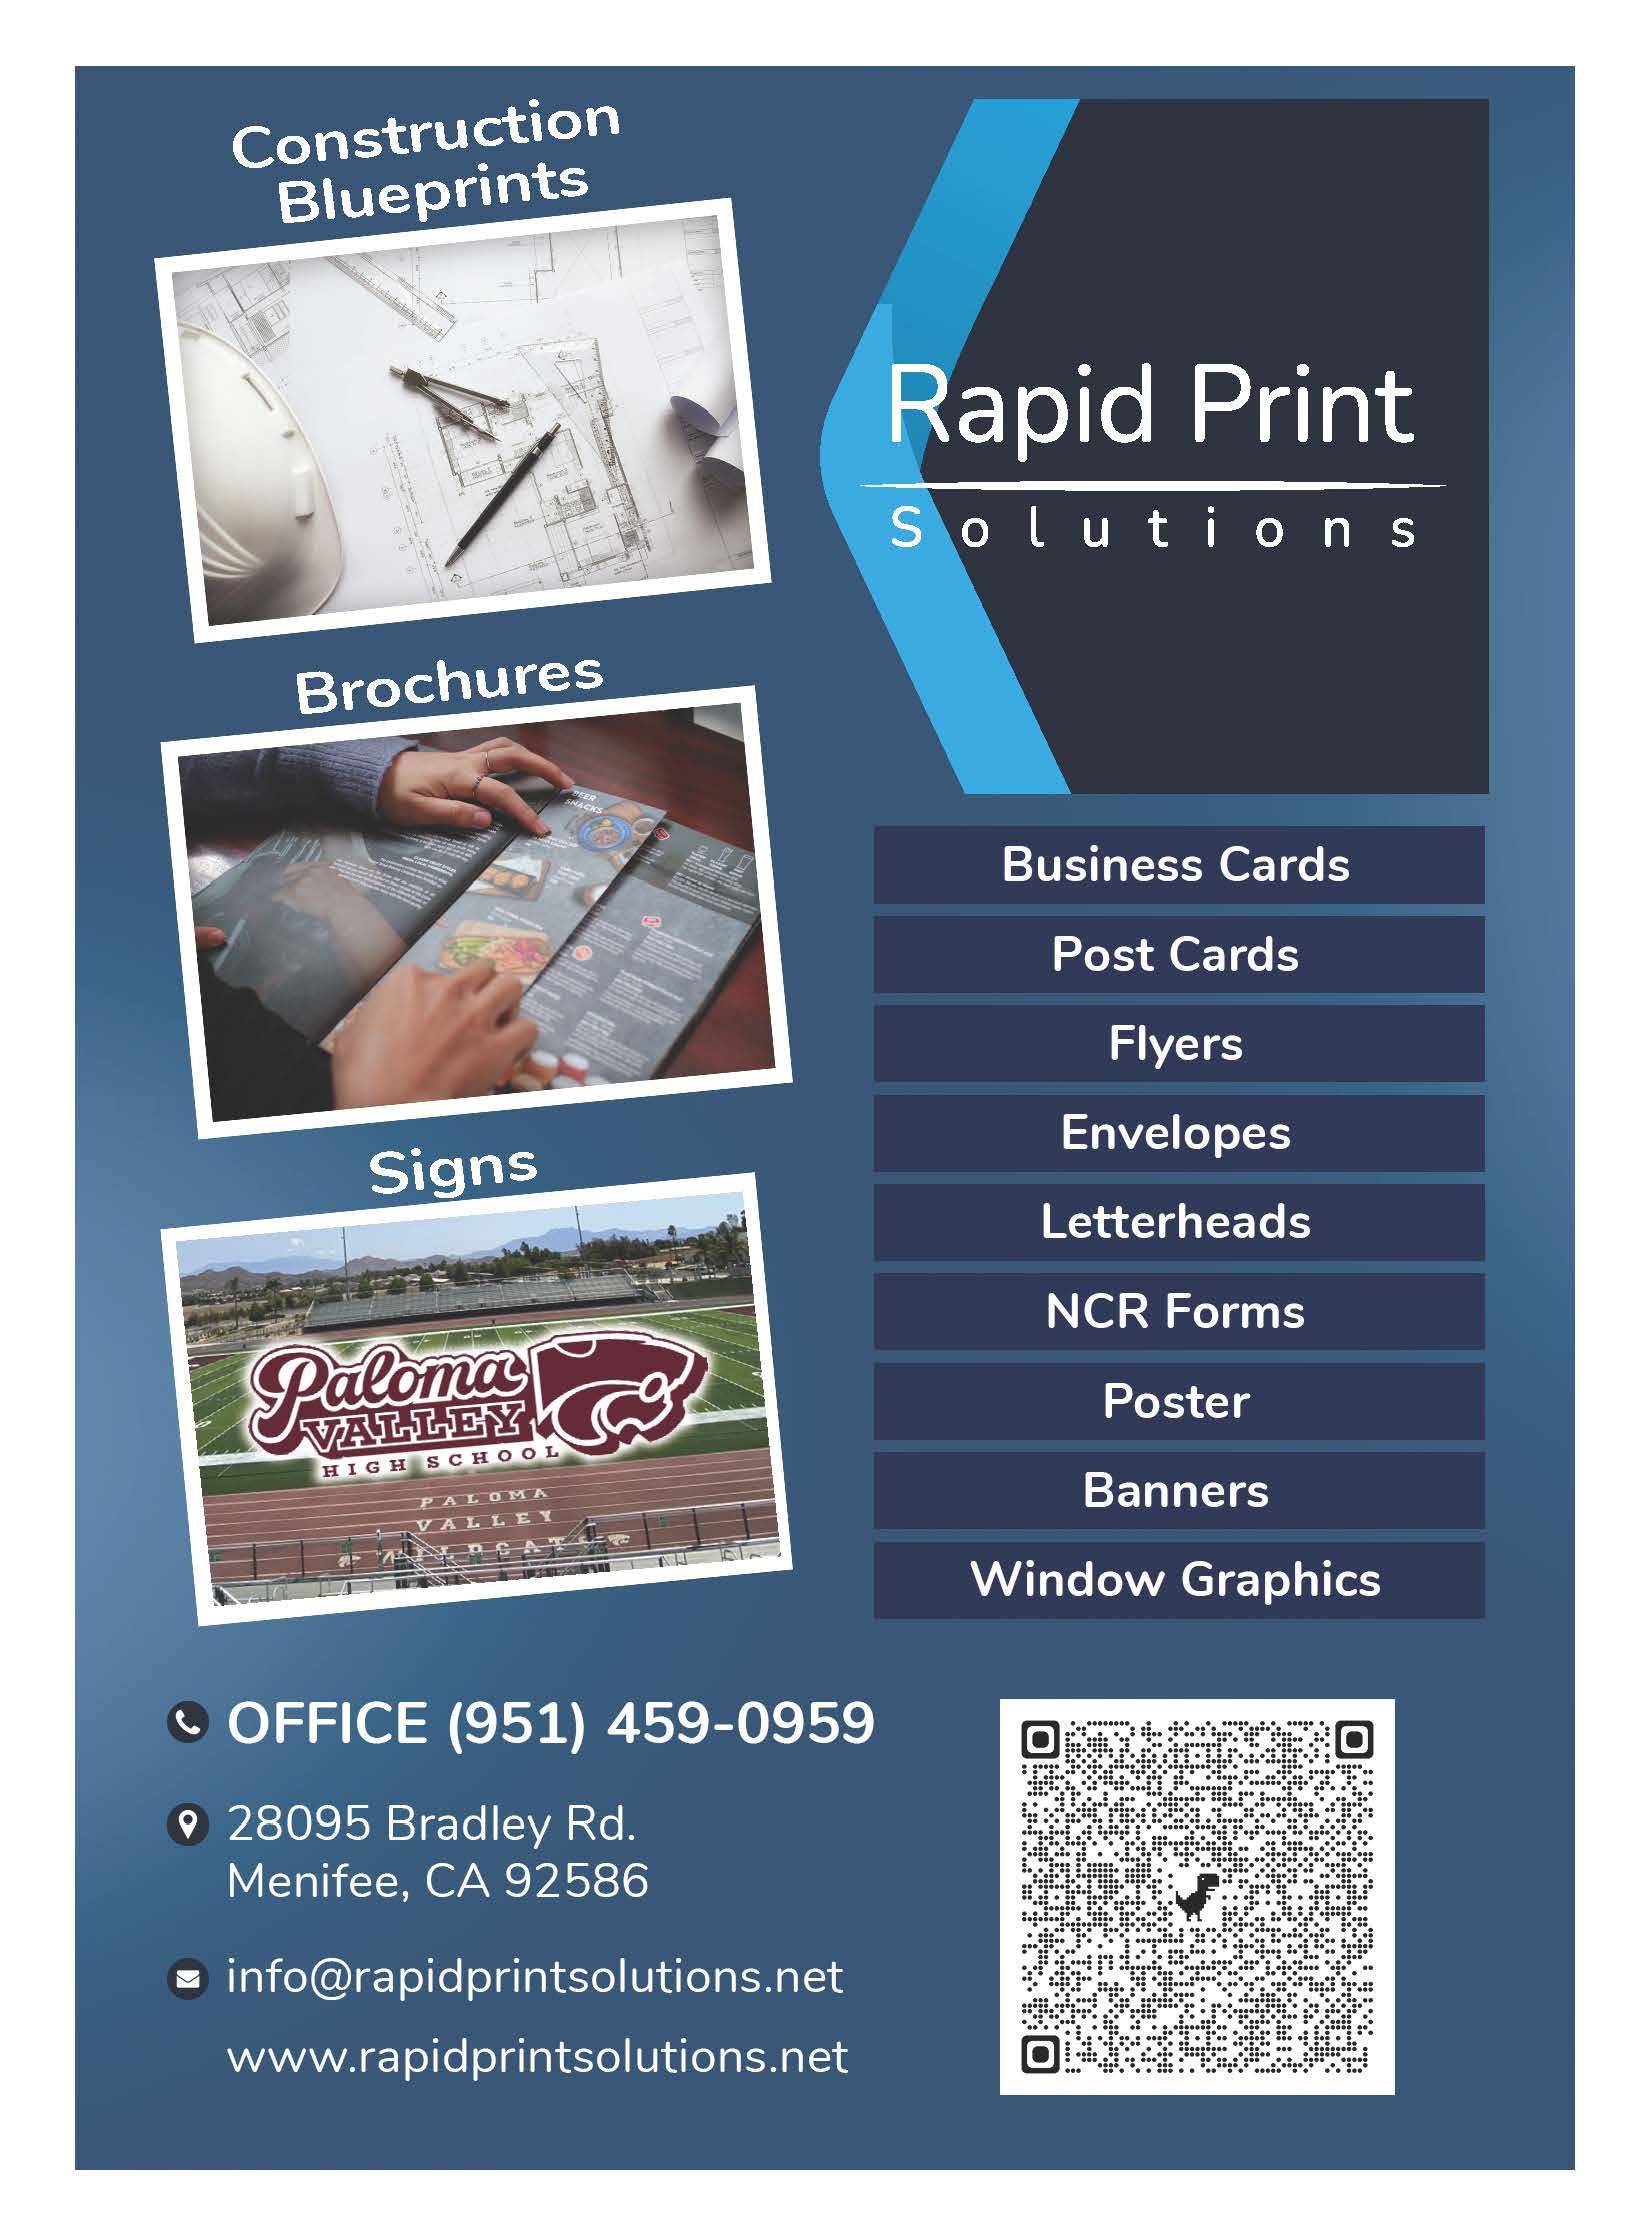 Use Rapid Print Solutions for fast, professional service | Menifee 24/7